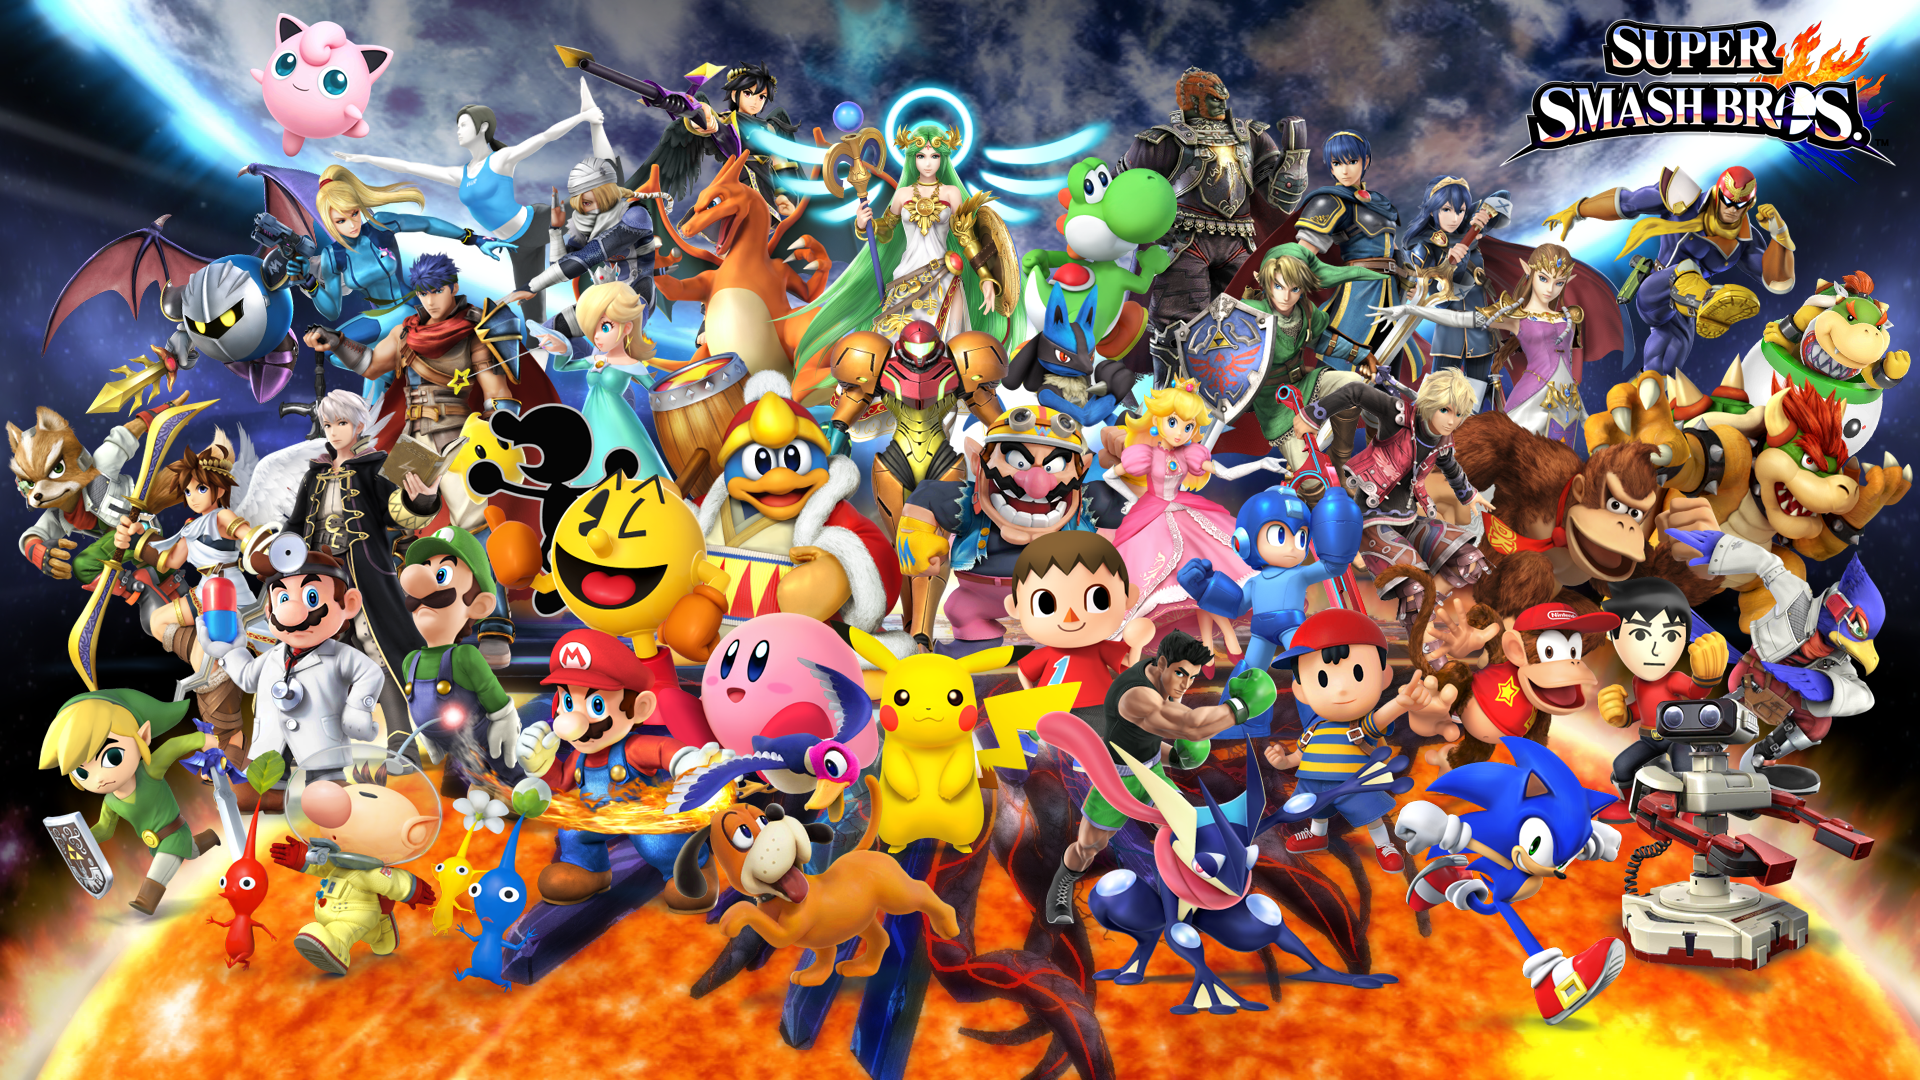 Ssb4 Finally The Wallpaper Is Plete What A Cluster Of Characters